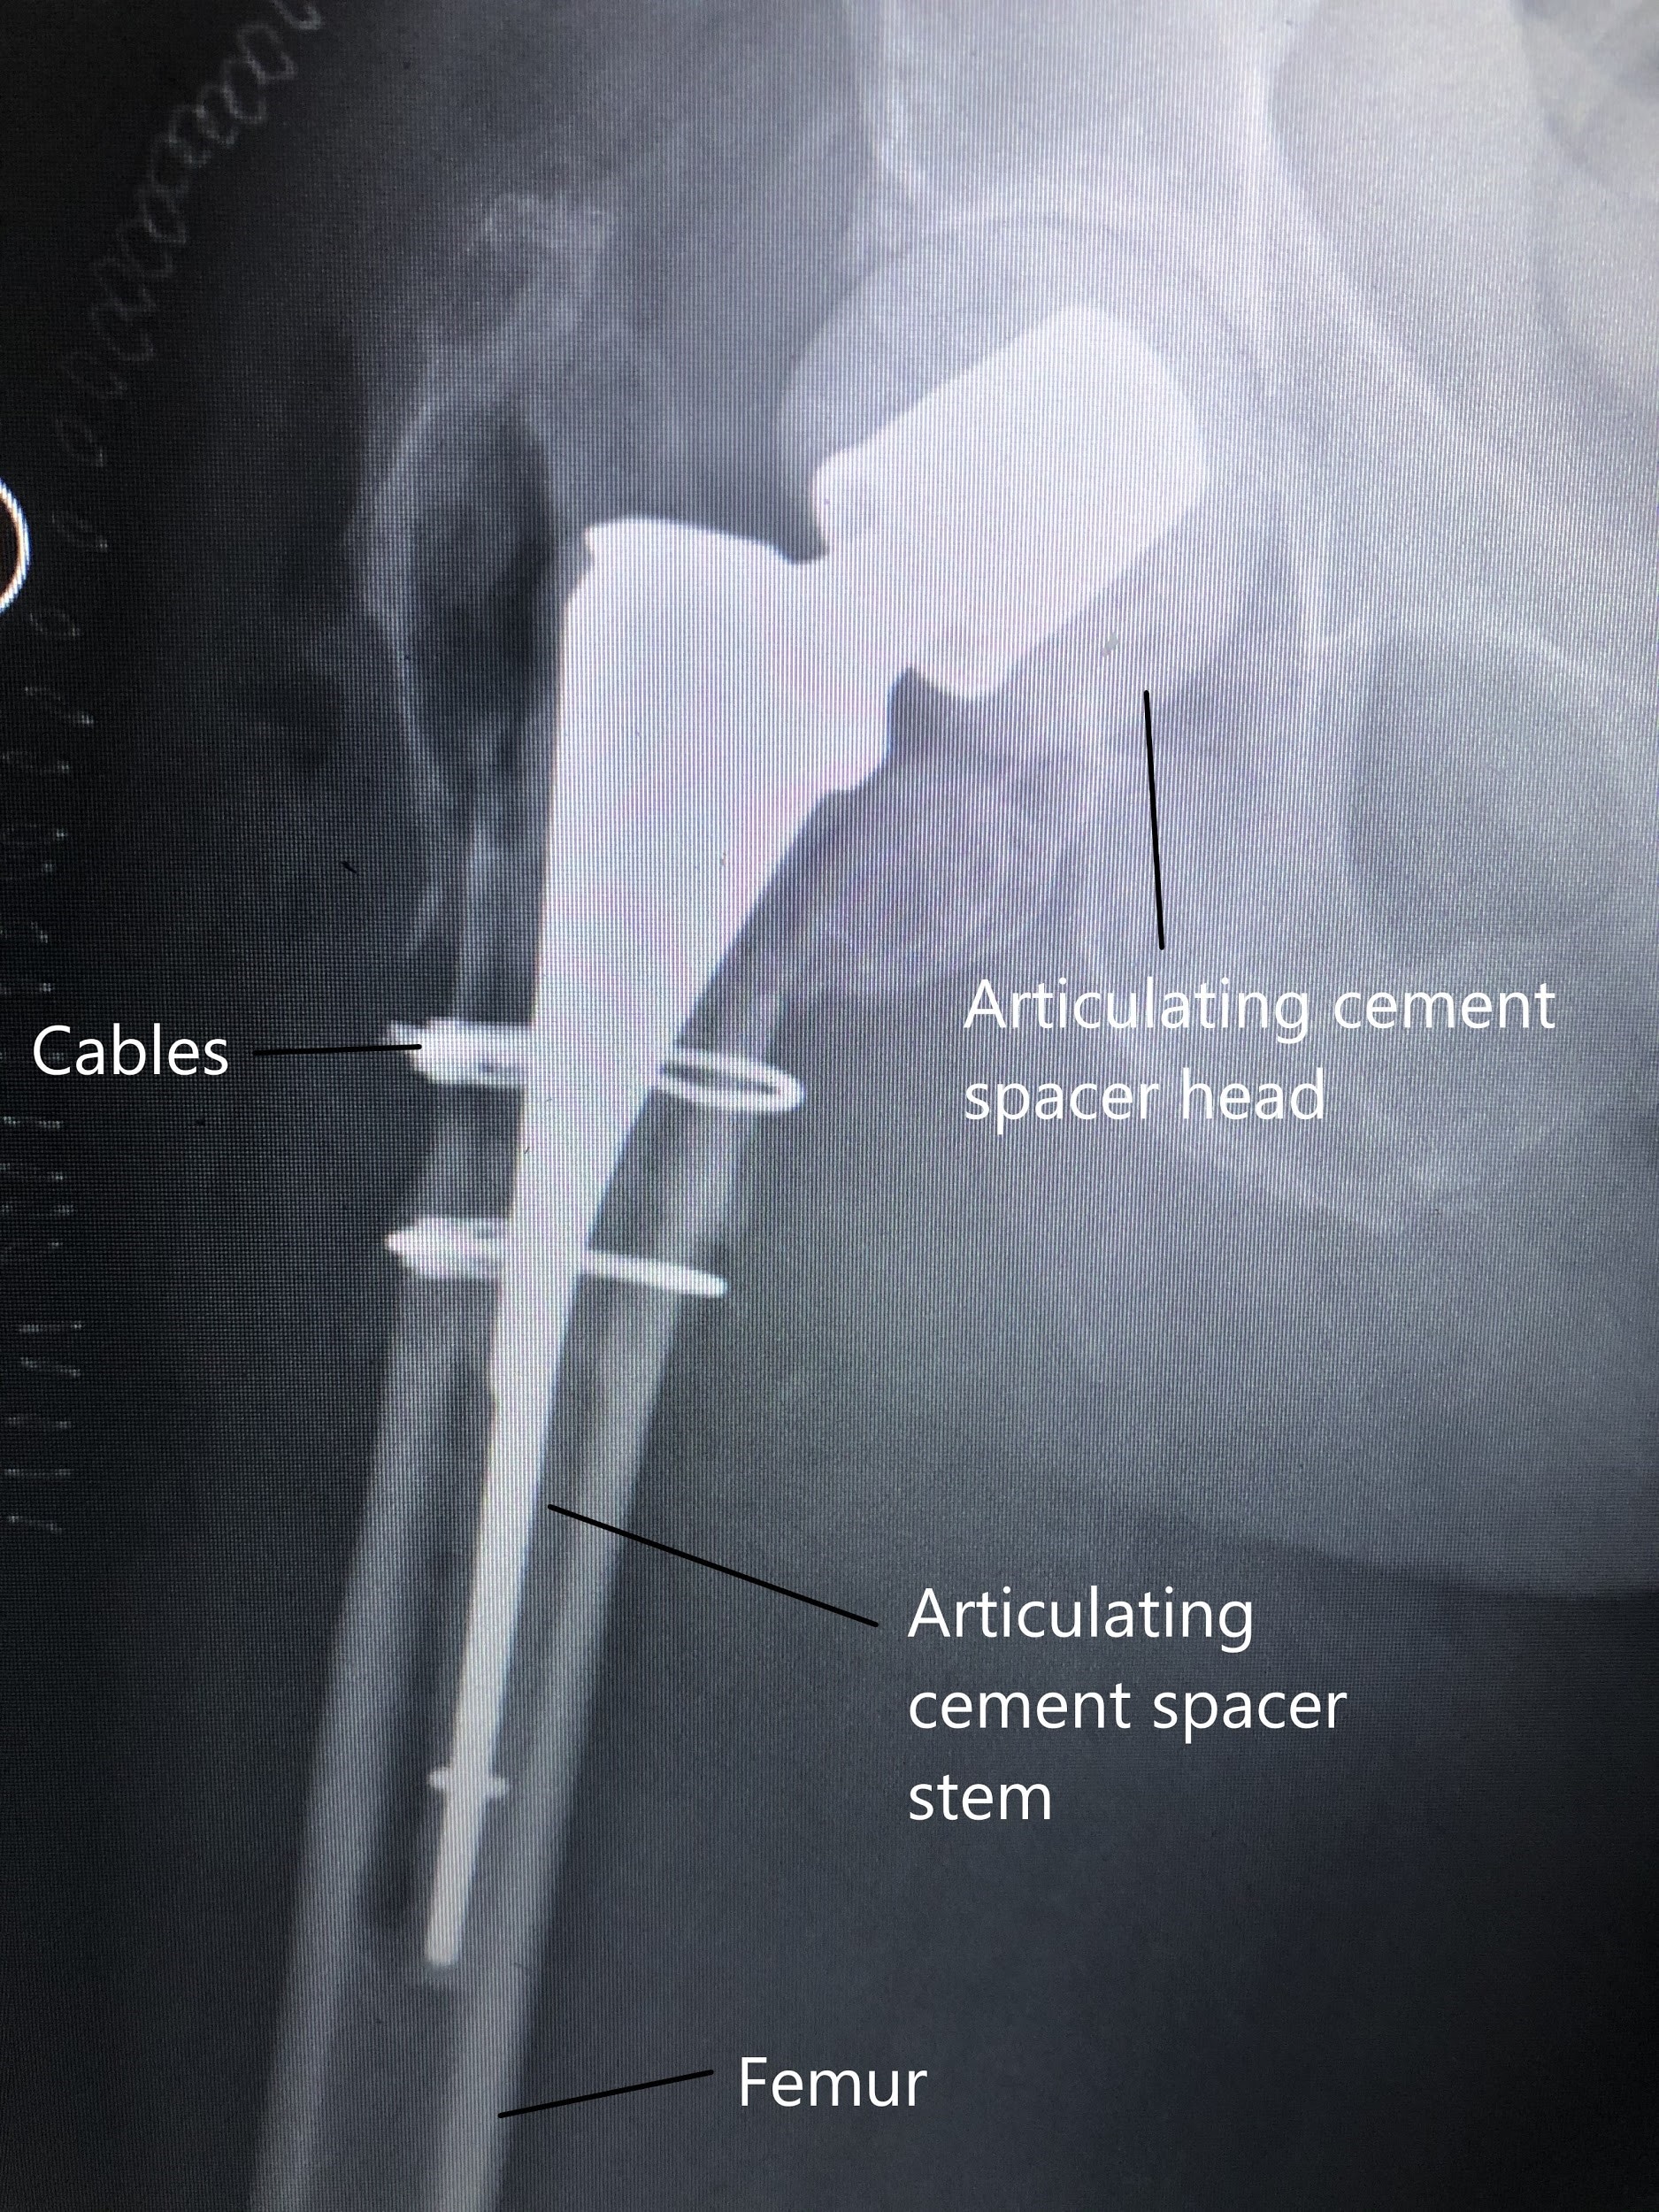 X-ray showing cement spacer in place